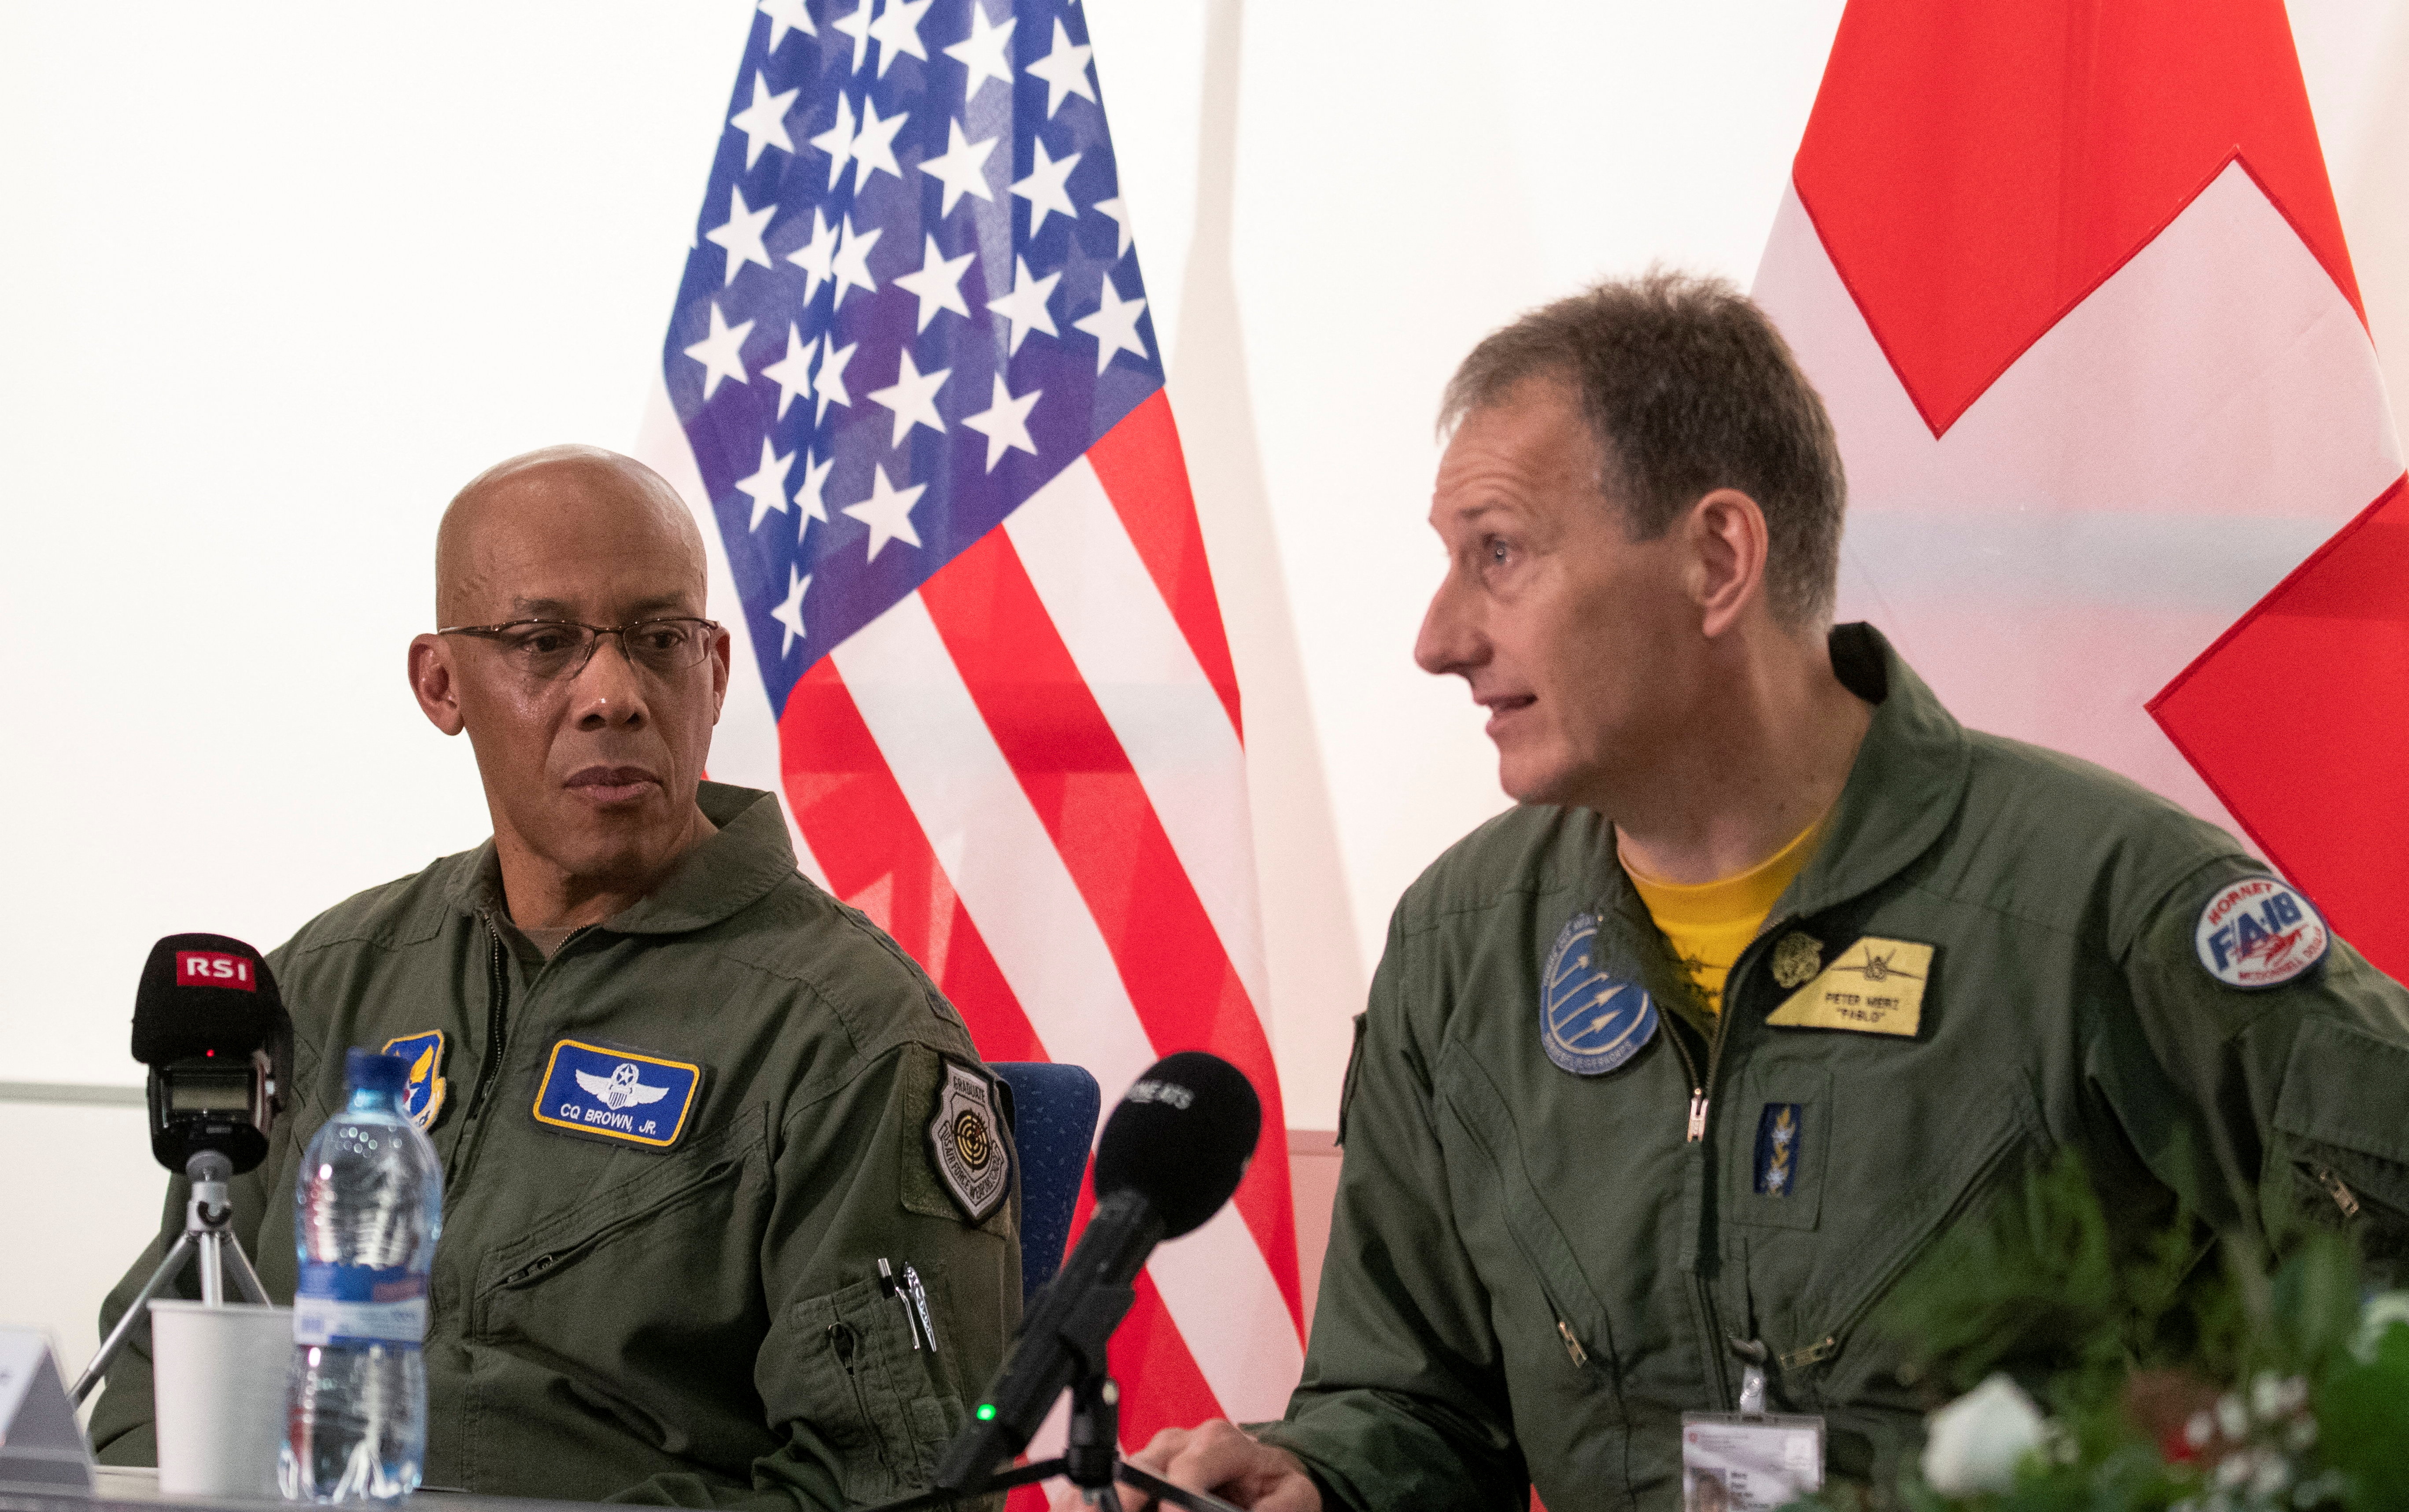 Chief of Staff of the U.S. Air Force General Brown Jr. listens to Commander of the Swiss Air Force General Merz during a news conference in Payerne